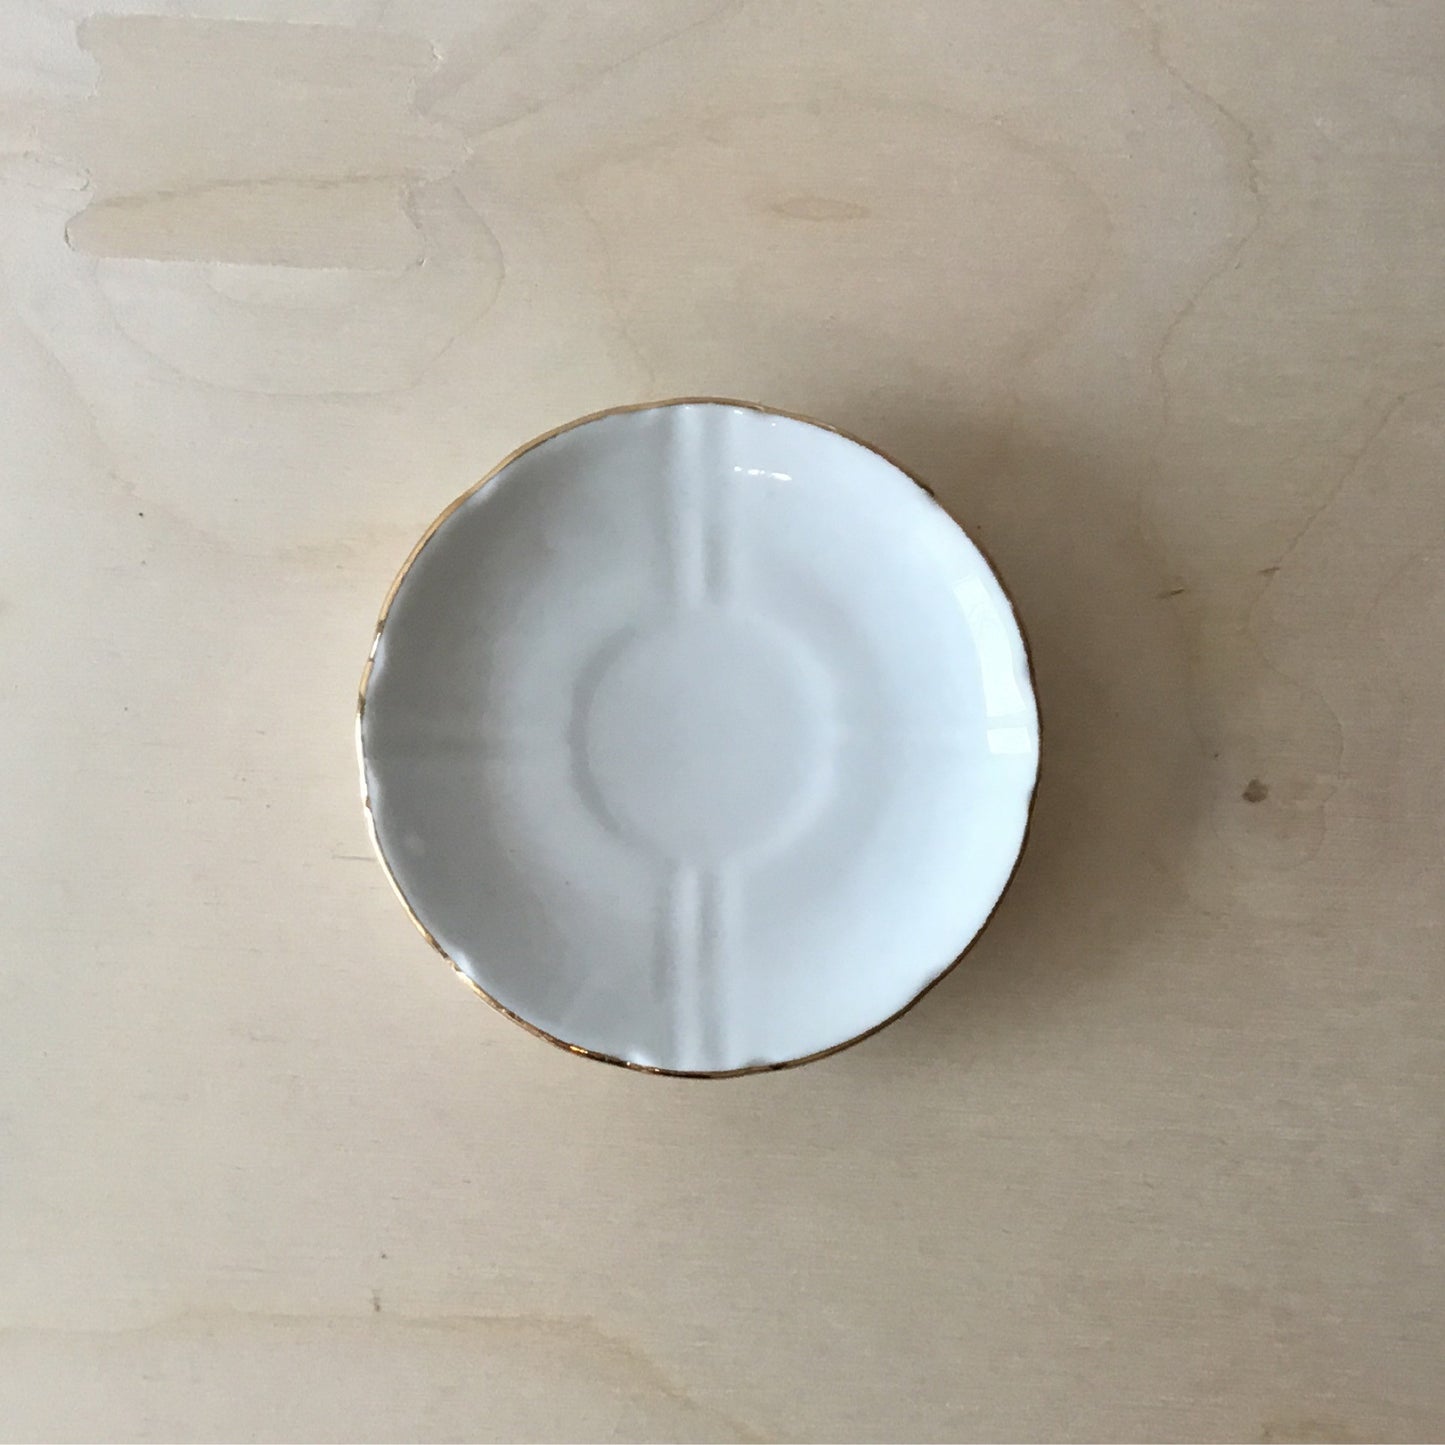 Pair of Tiny Porcelain Plates with Gold Trim